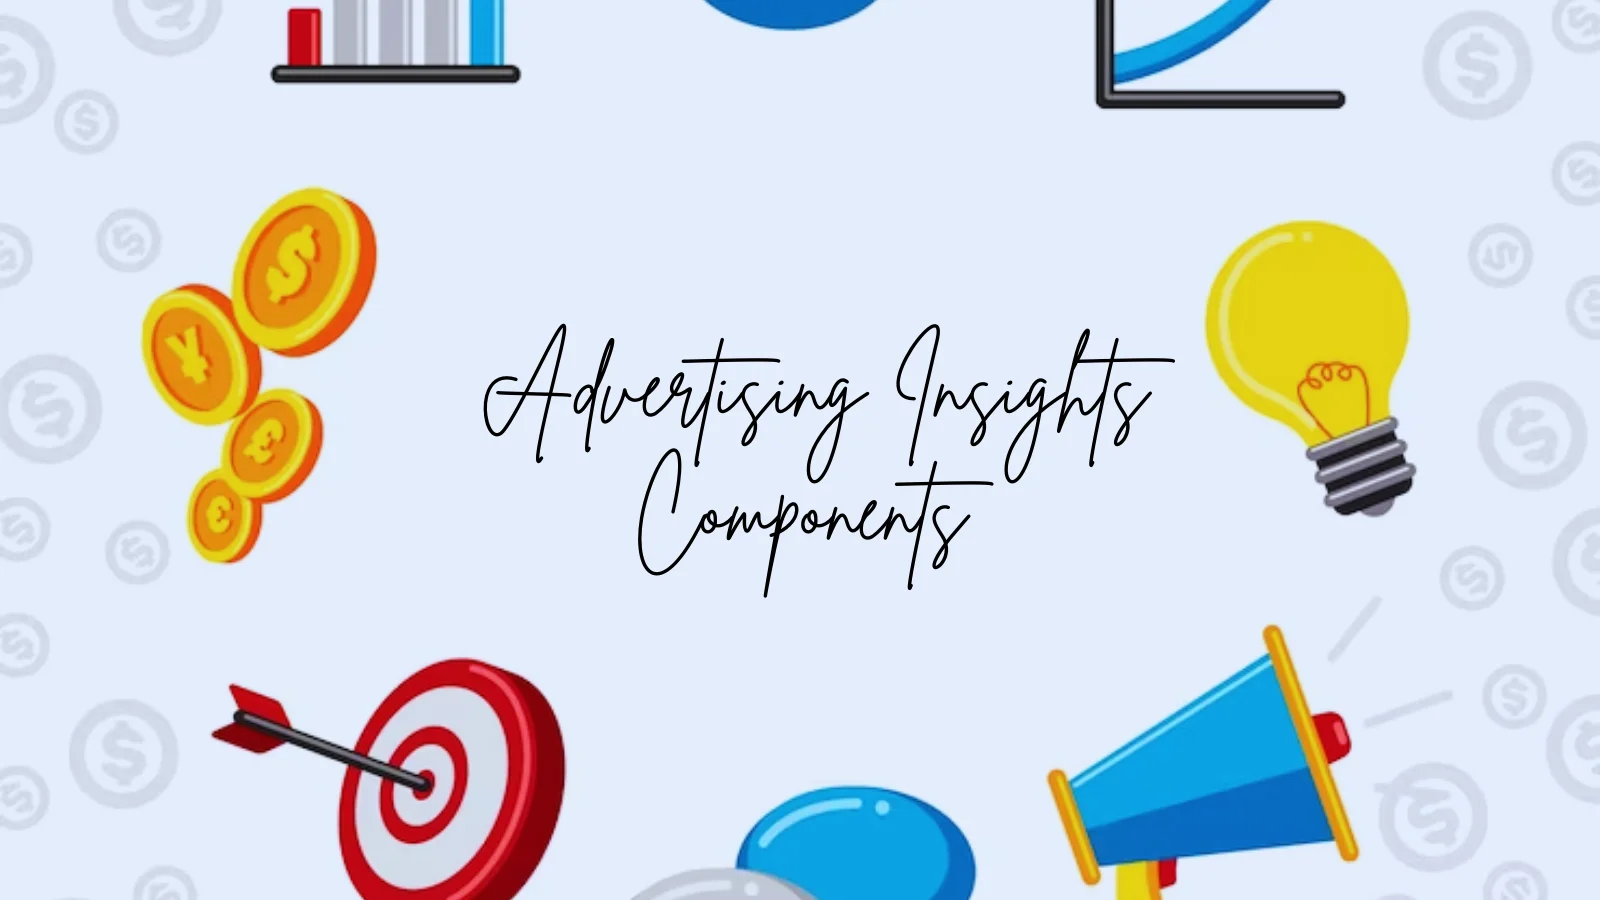 advertising-insights-components